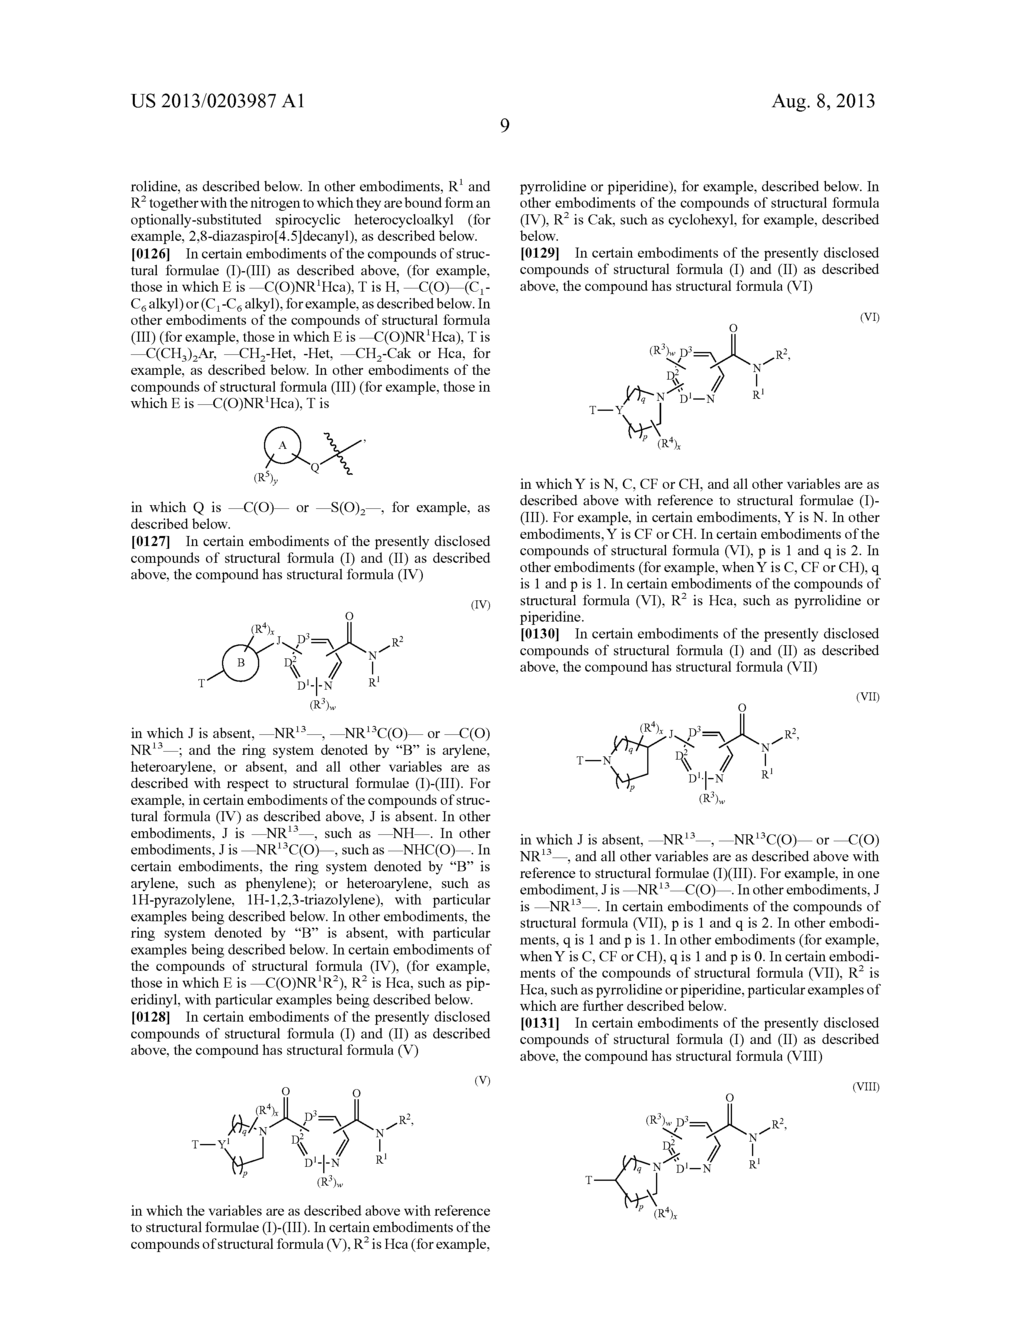 AMPK-ACTIVATING HETEROCYCLIC COMPOUNDS AND METHODS FOR USING THE SAME - diagram, schematic, and image 10